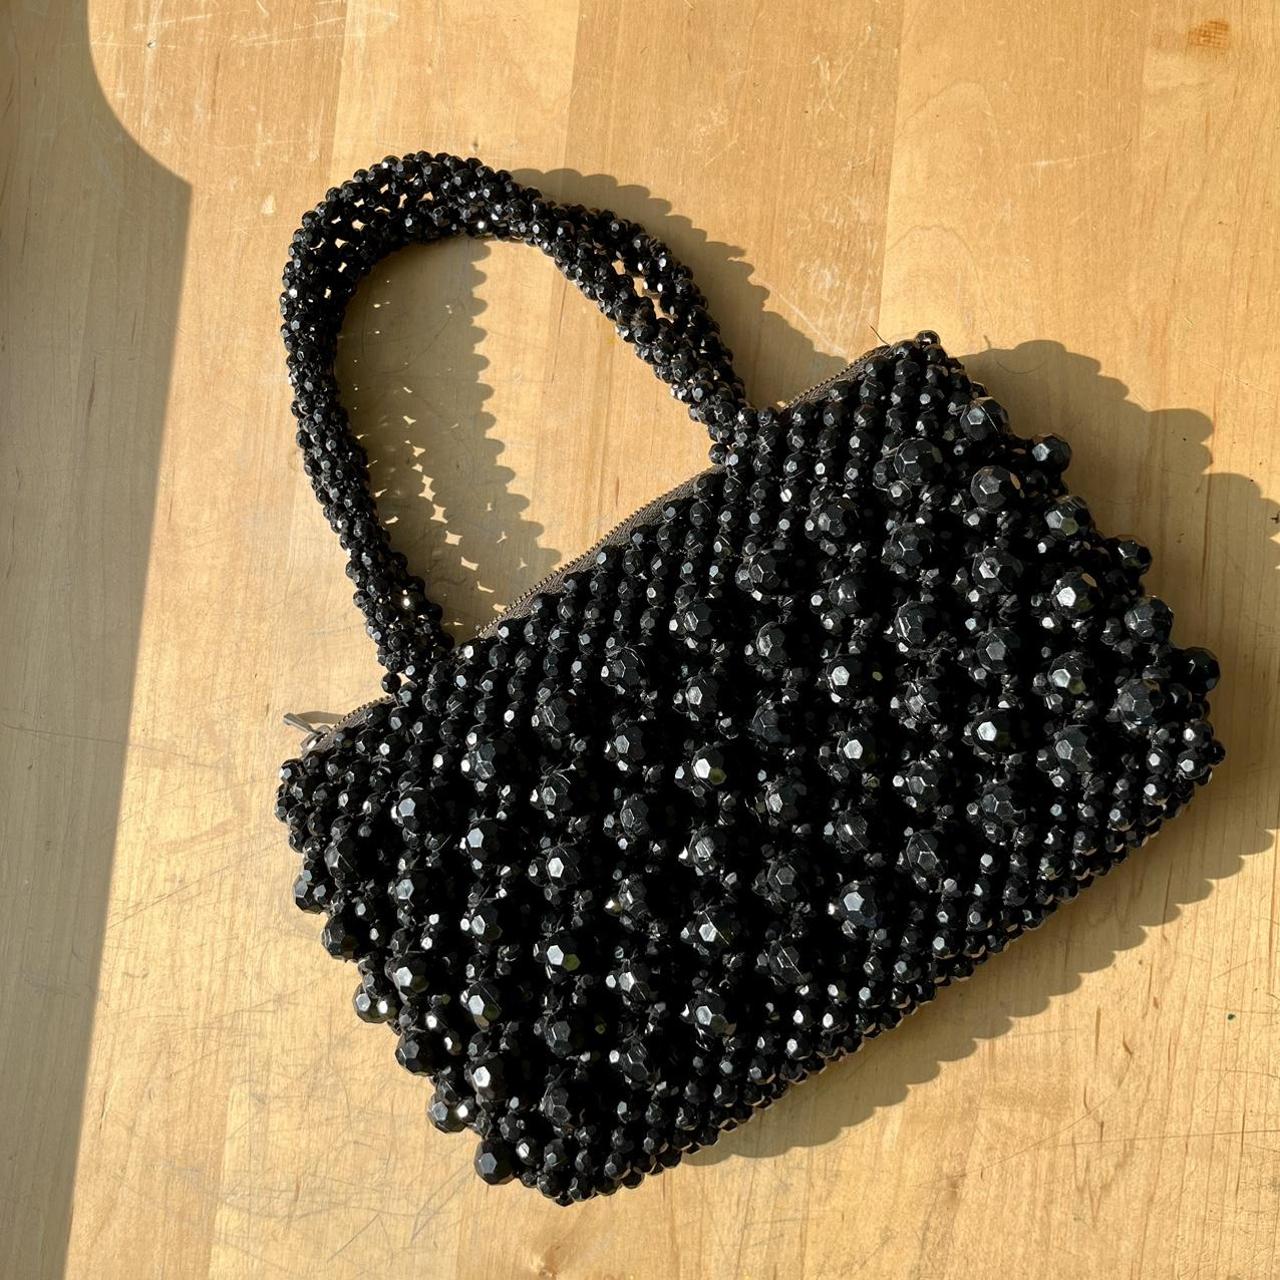 Beaded clutch. Small Beautiful bag in perfect - Depop